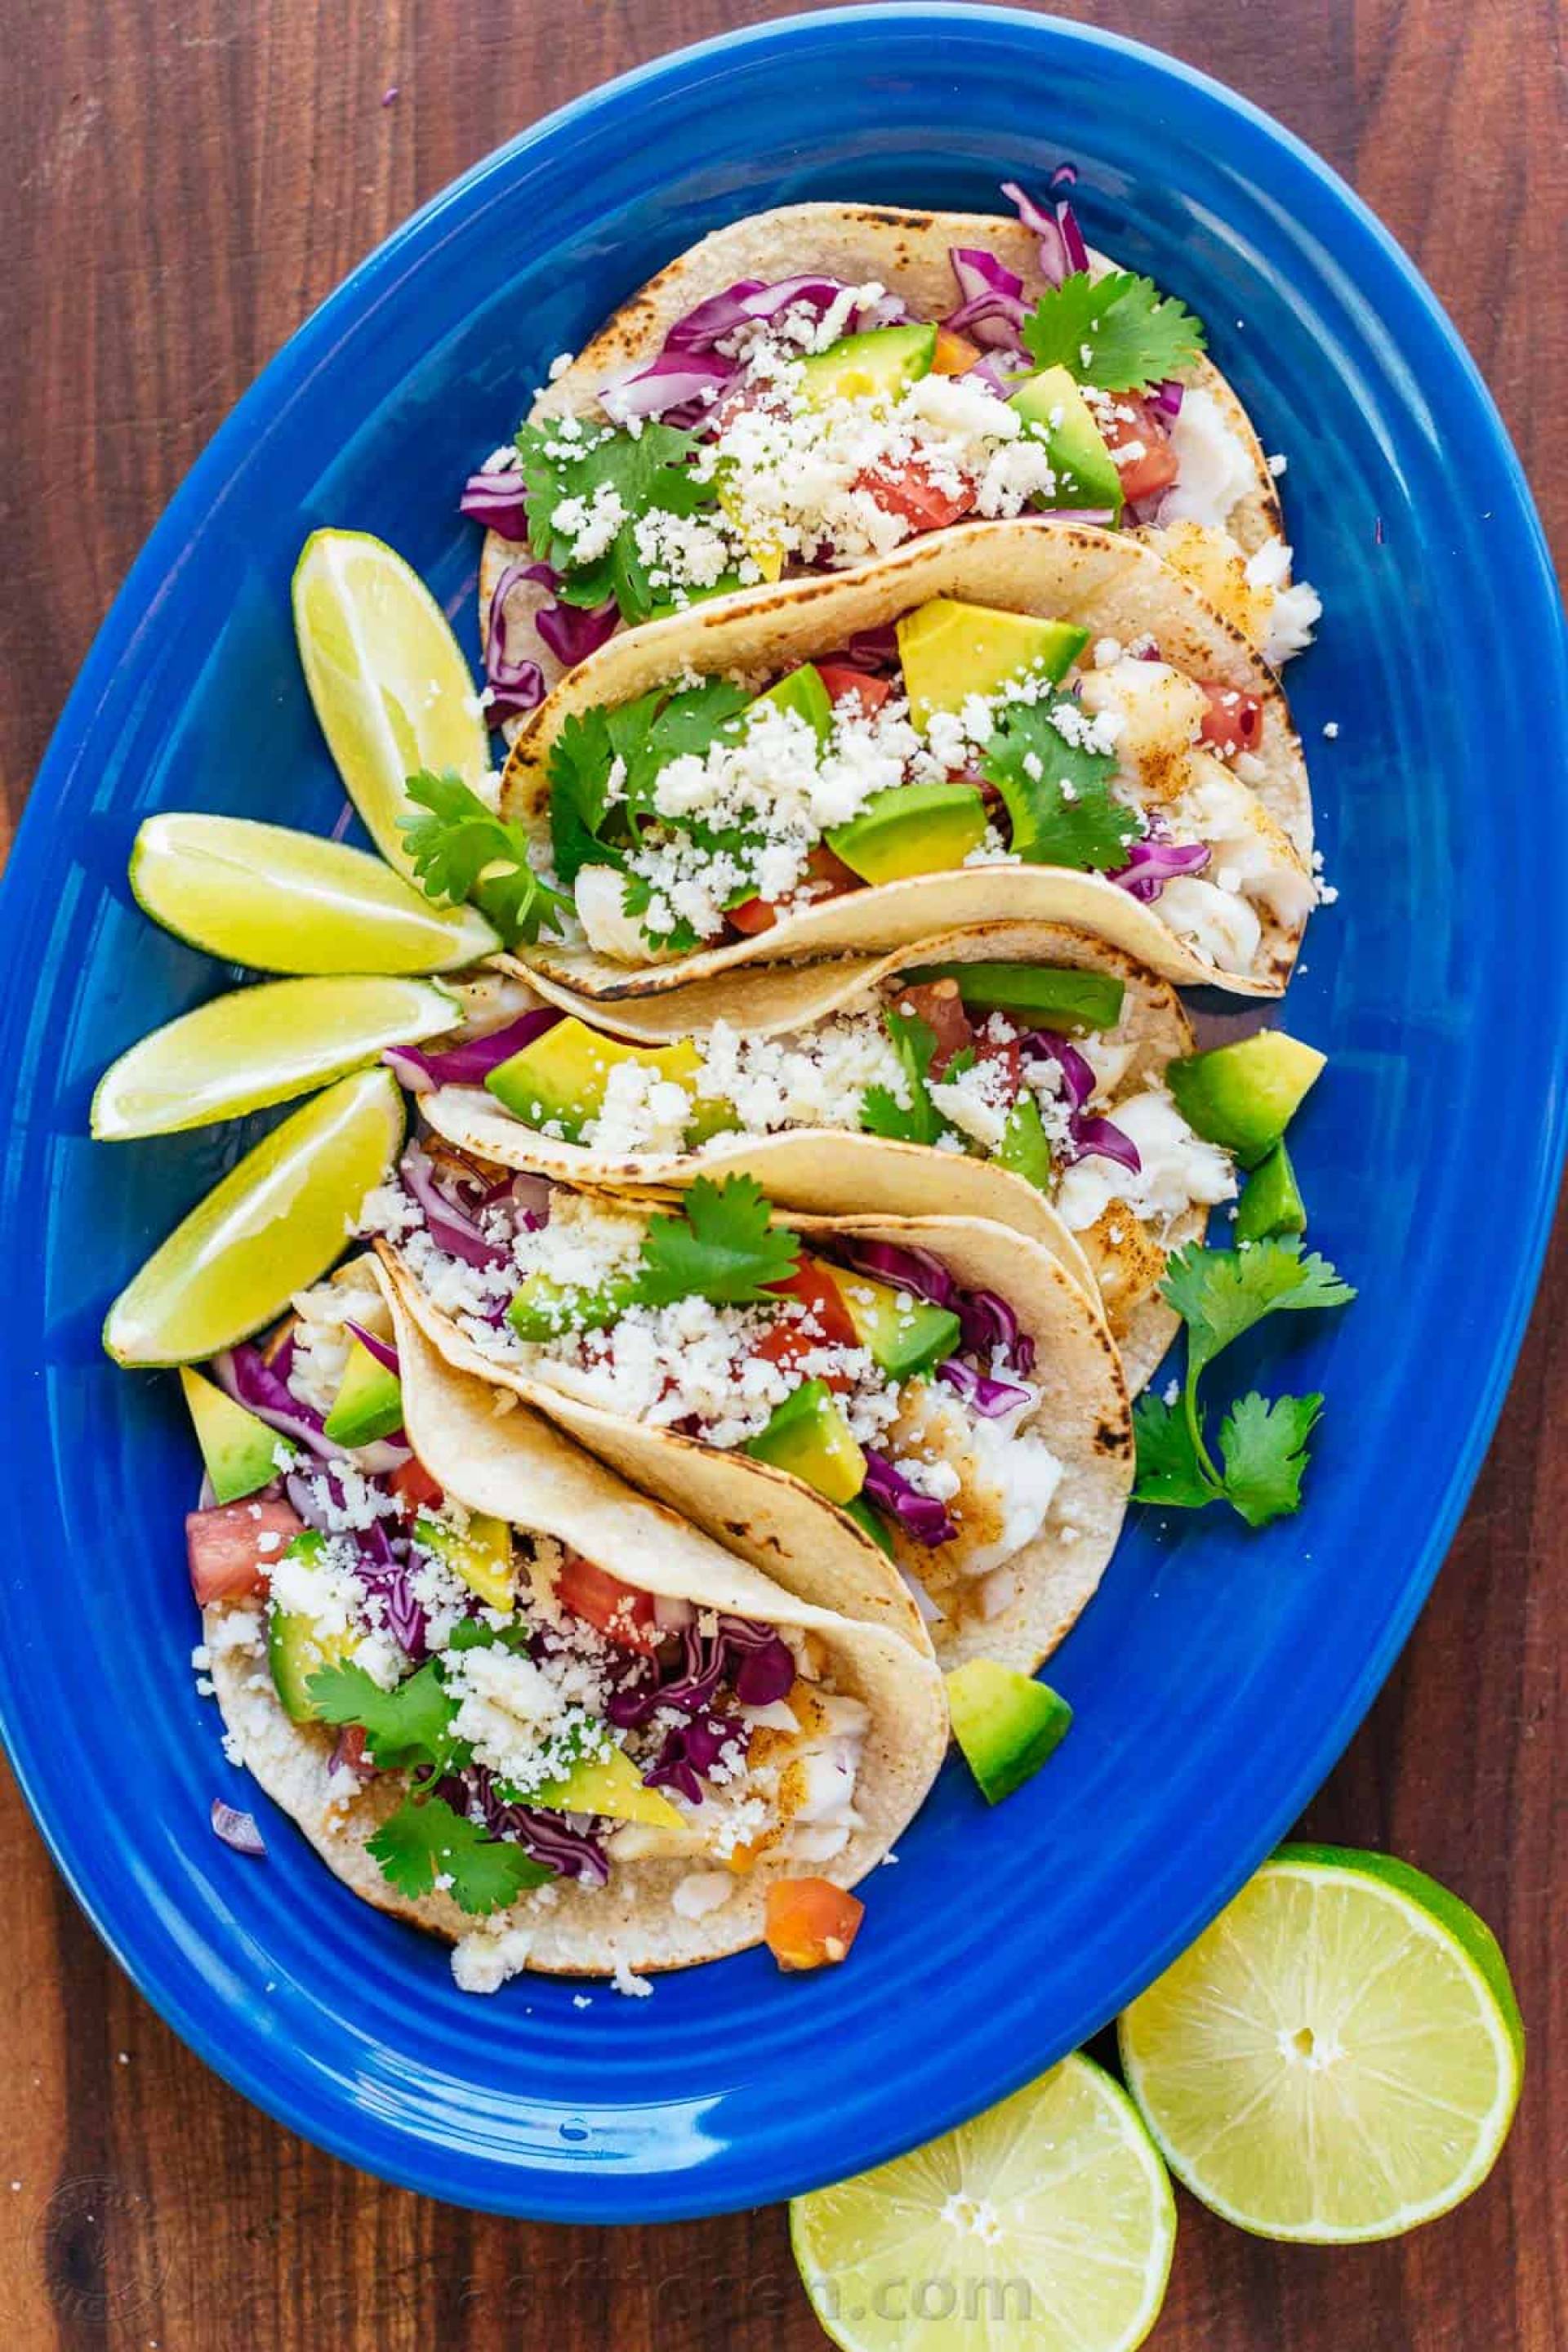 Chili Lime Fish Tacos (Dairy-Free)